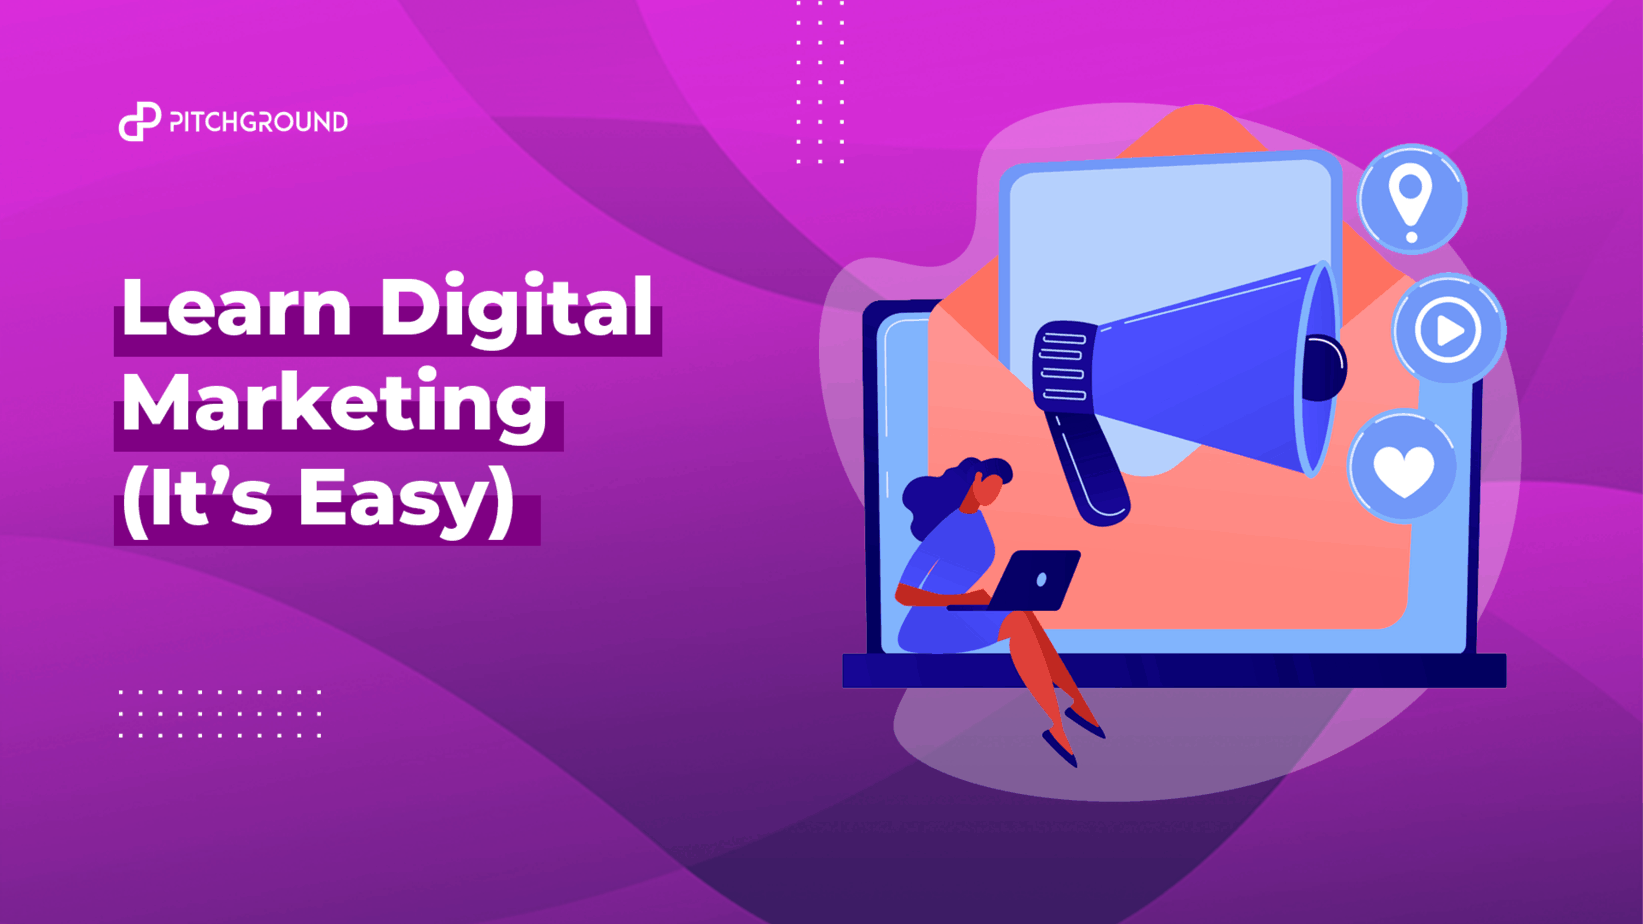 Learn Digital Marketing in 2022 (It's Easy) - PitchGround